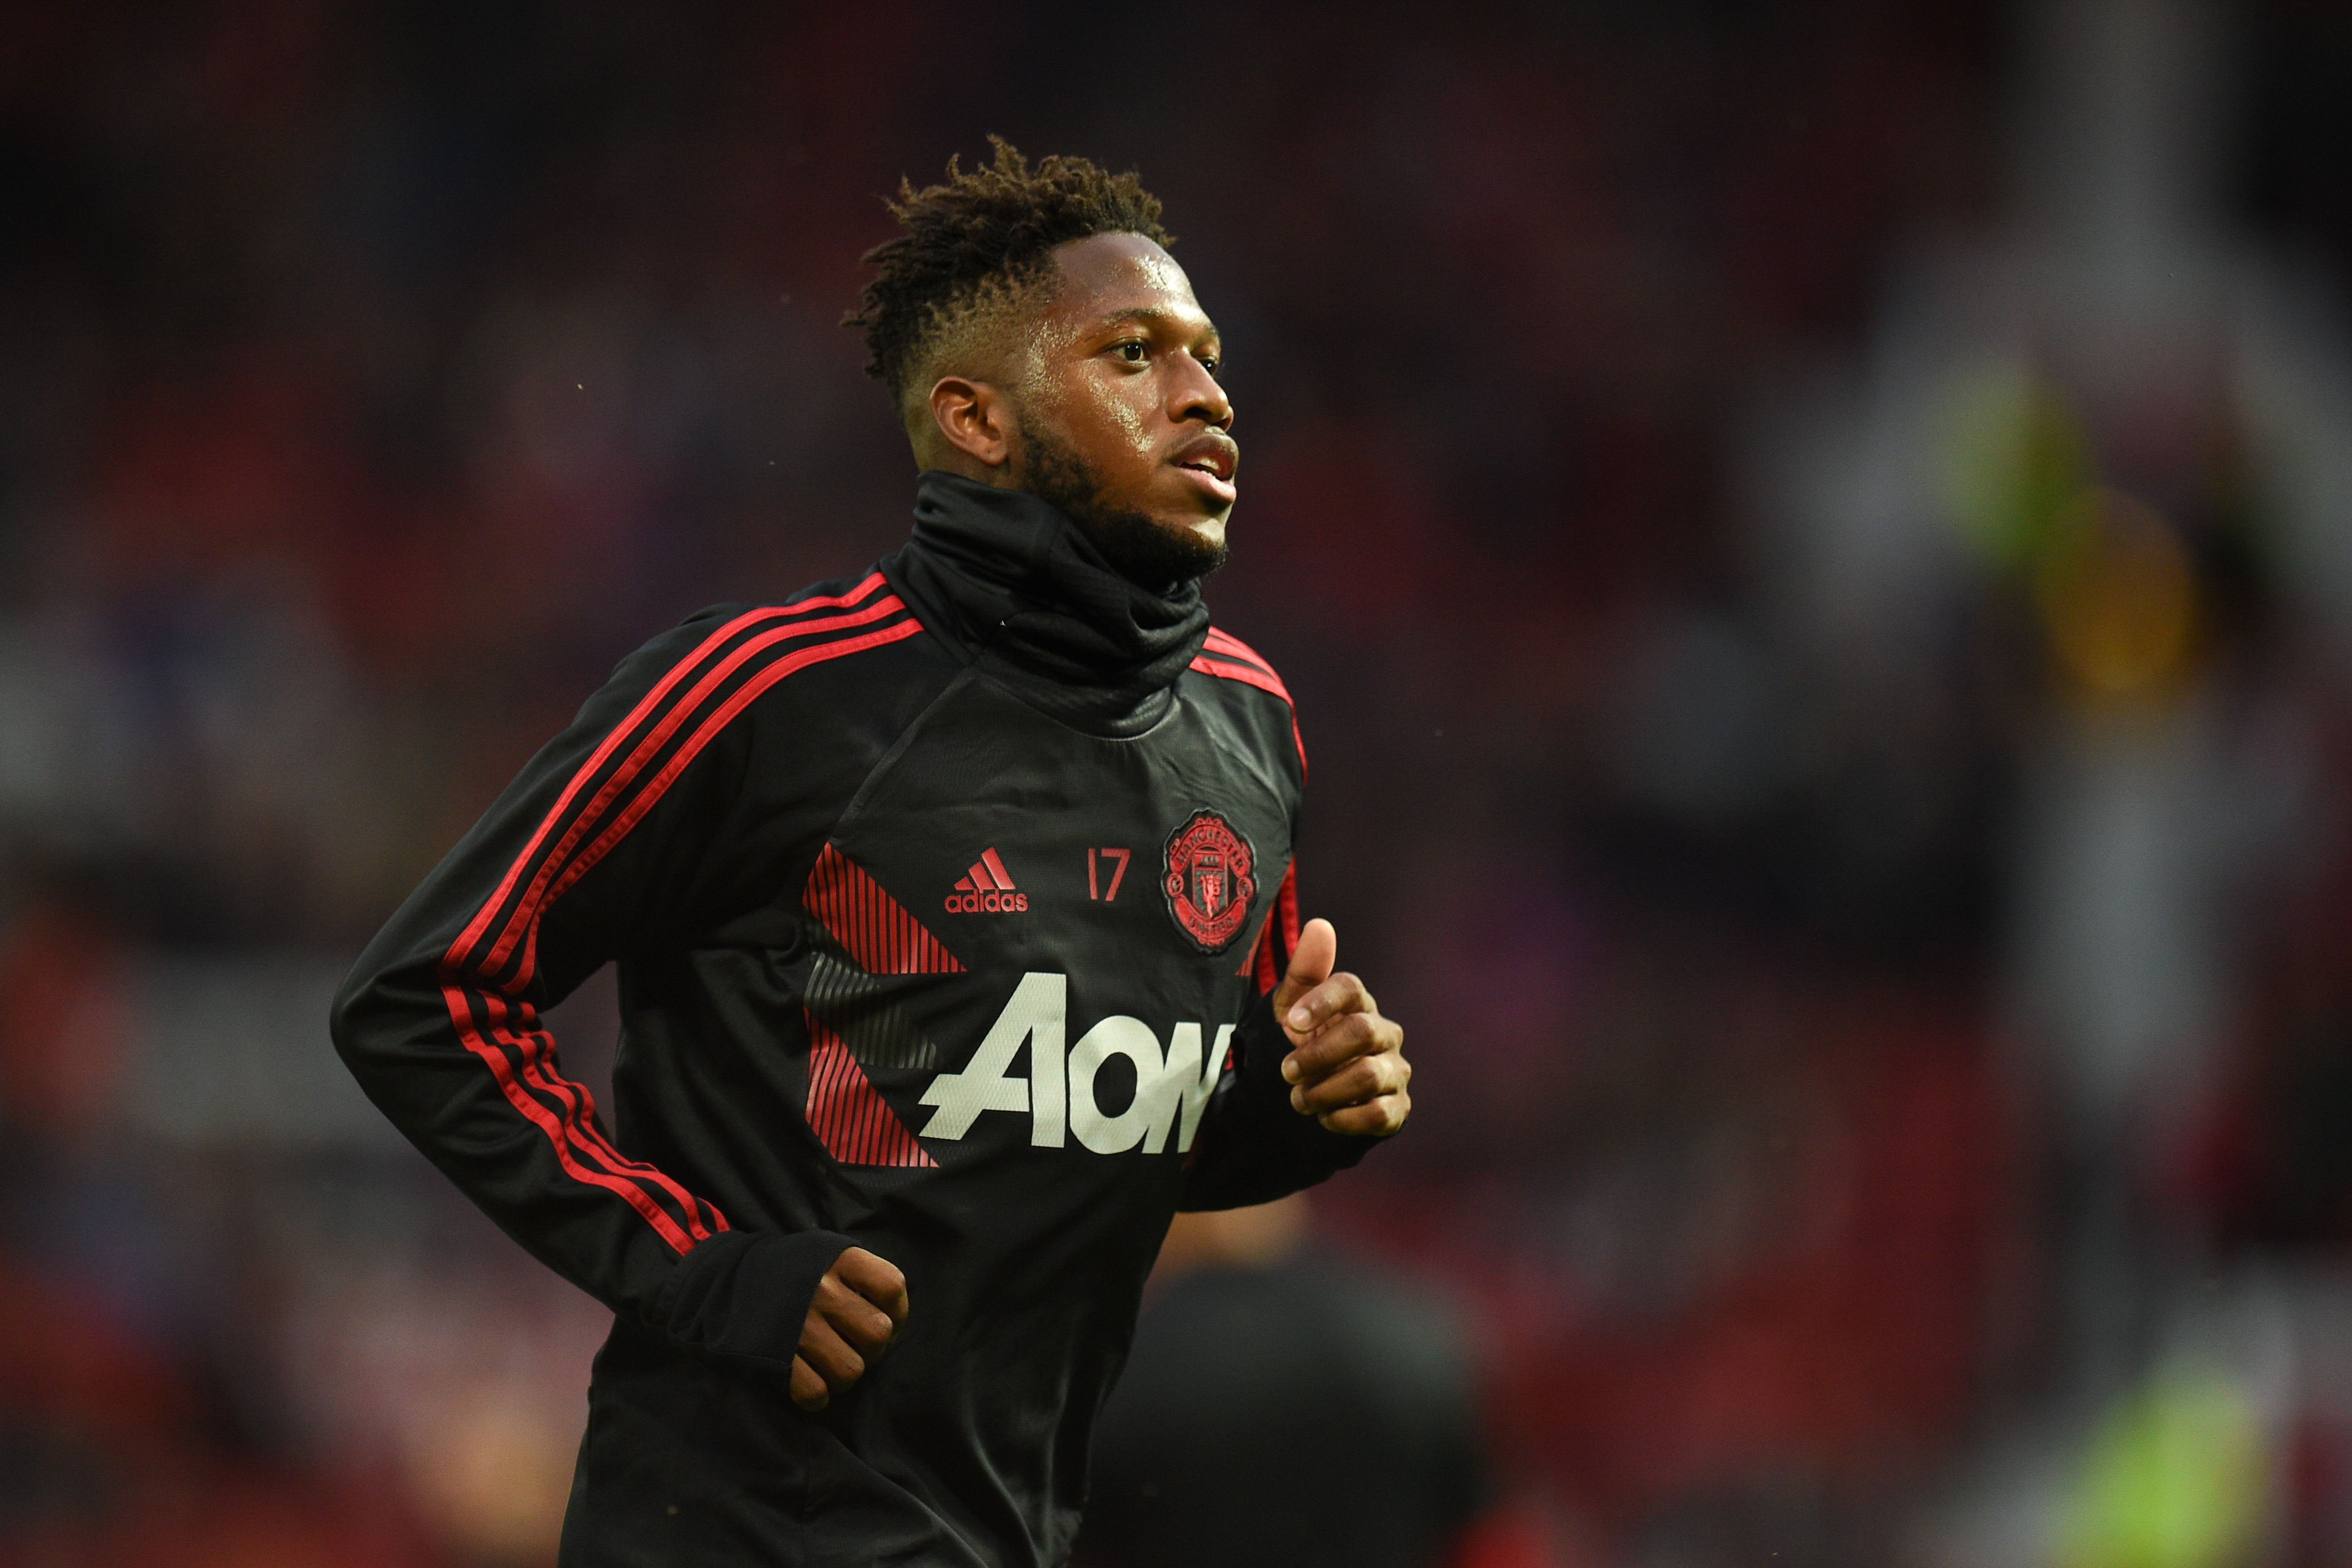 At his best, Fred can ensure flowing moves in the Manchester United midfield. (Photo by Oli Scarff/AFP/Getty Images)